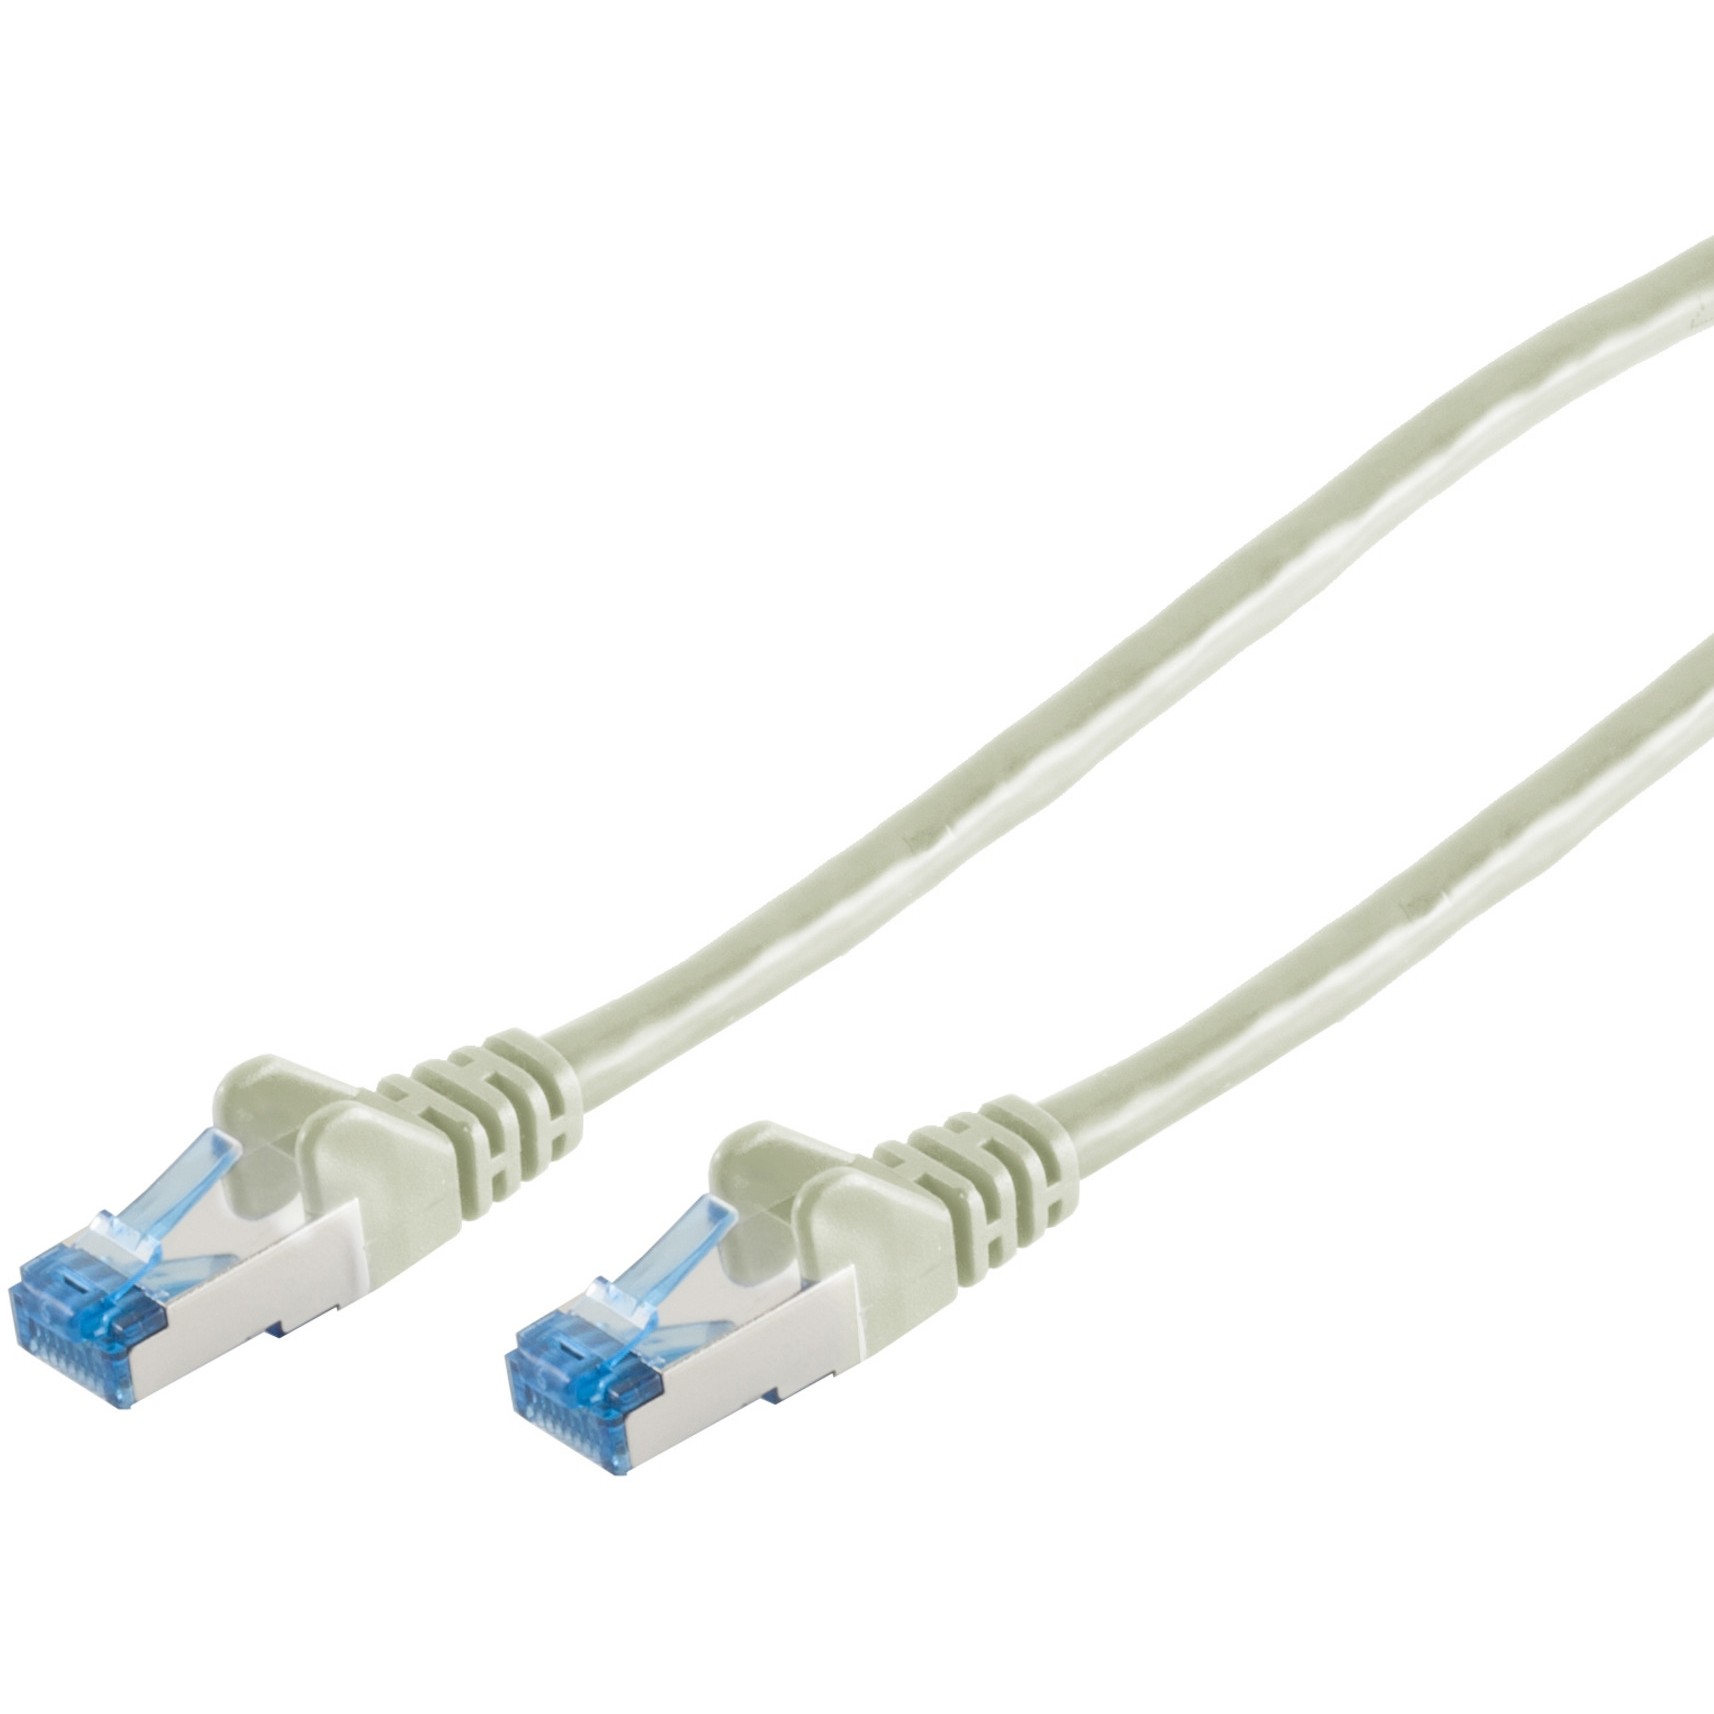 S-Conn 75715 networking cable - 75715